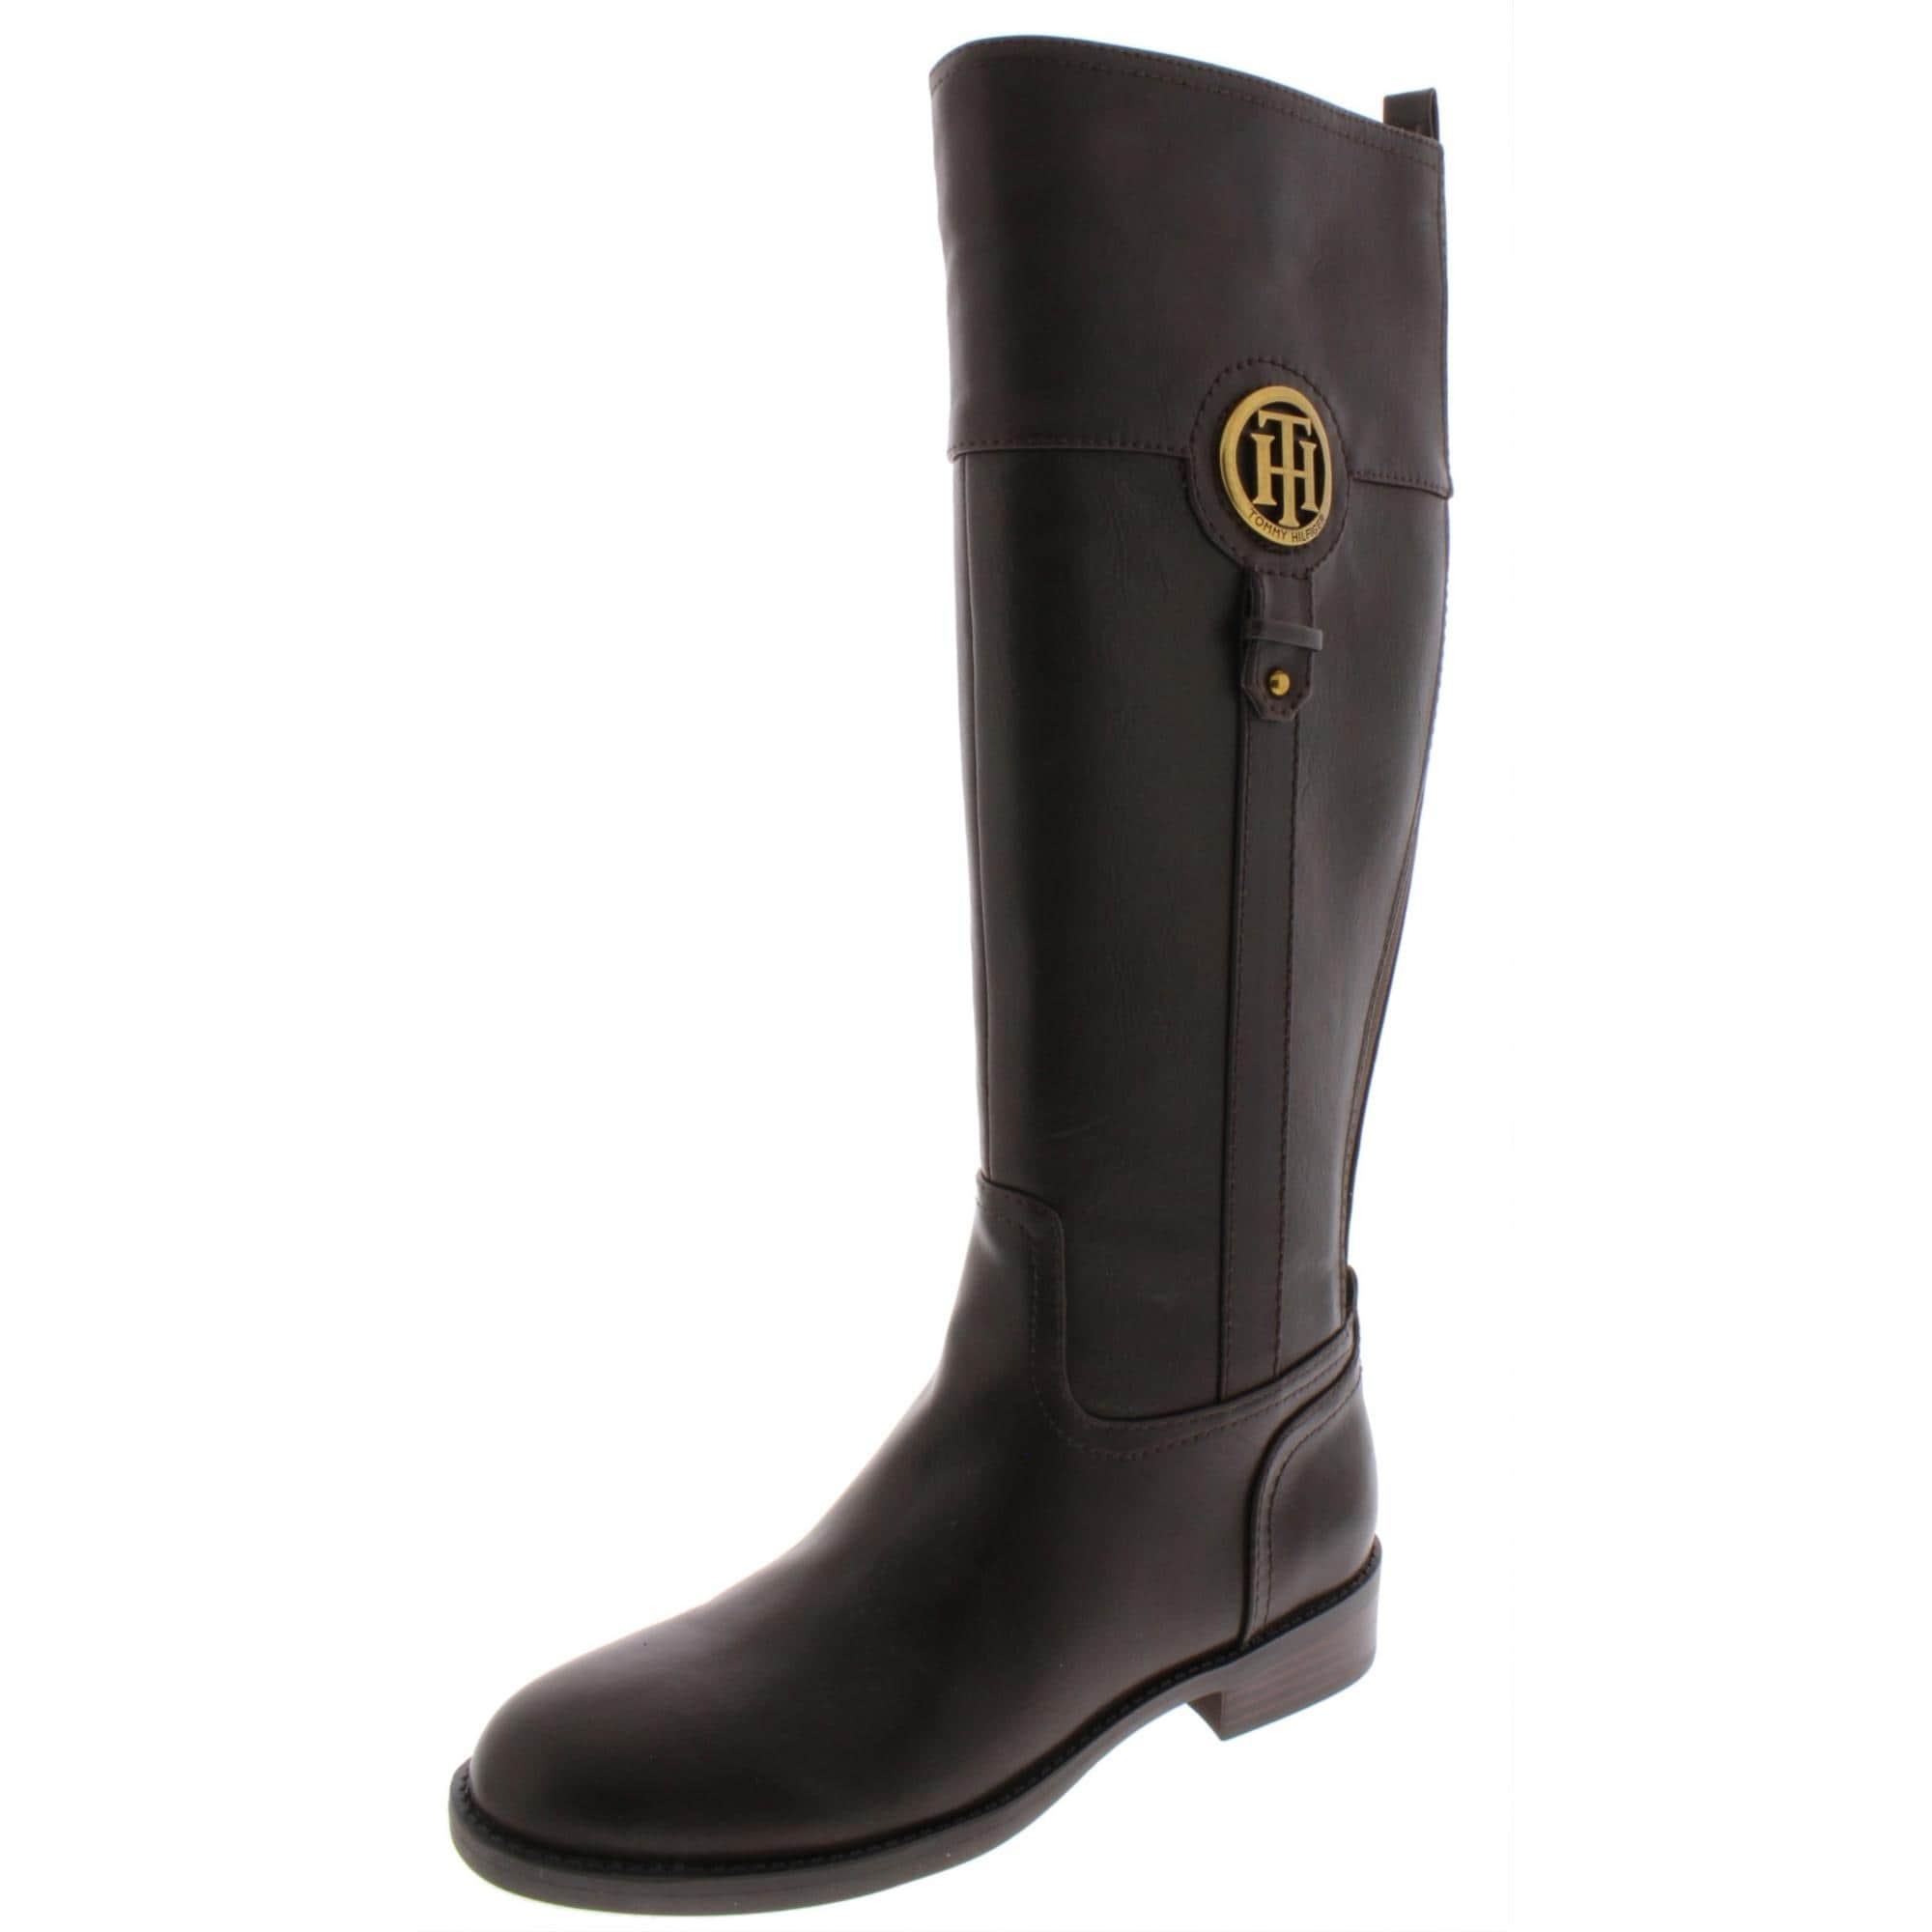 tommy hilfiger riding boots black